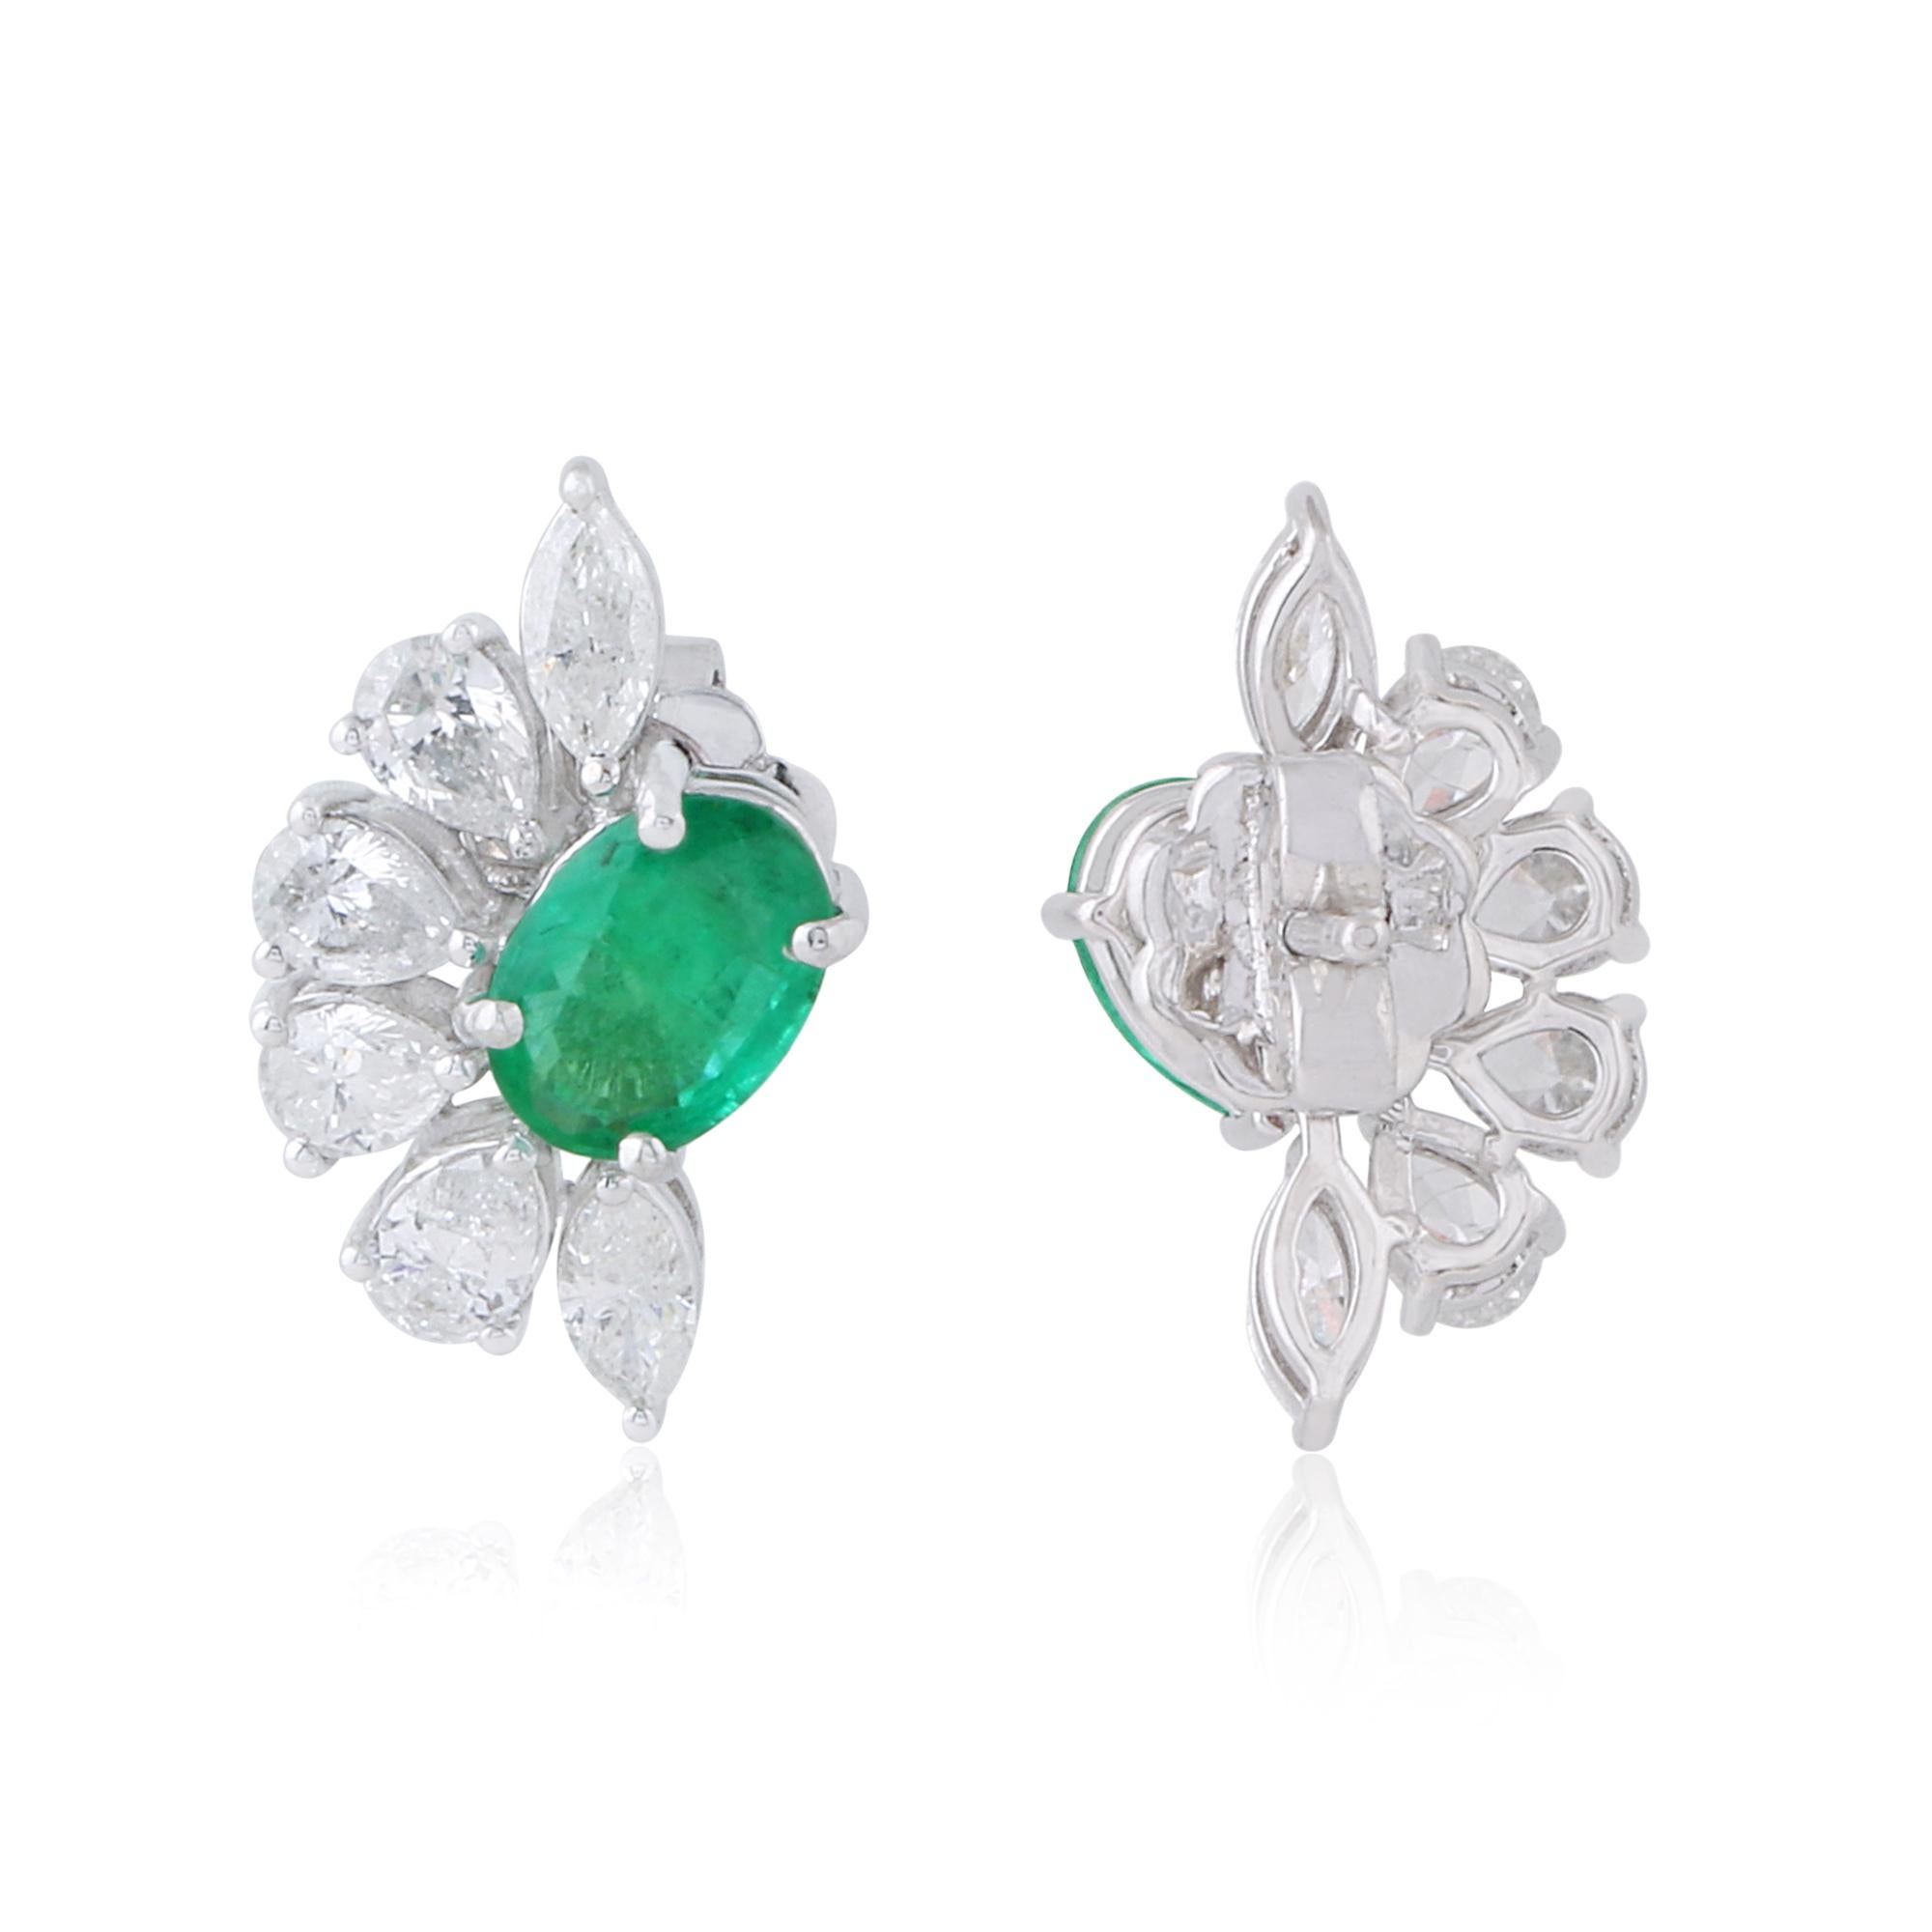 Item Code :- CN-32237
Gross Weight :- 3.57 gm approx.
14k White Gold Weight :- 3.10 gm
Diamond Weight :- 1.25 carat  ( AVERAGE DIAMOND CLARITY SI1-SI2 & COLOR H-I )
Emerald Weight :- 1.10 carat

✦ Sizing
.....................
We can adjust most